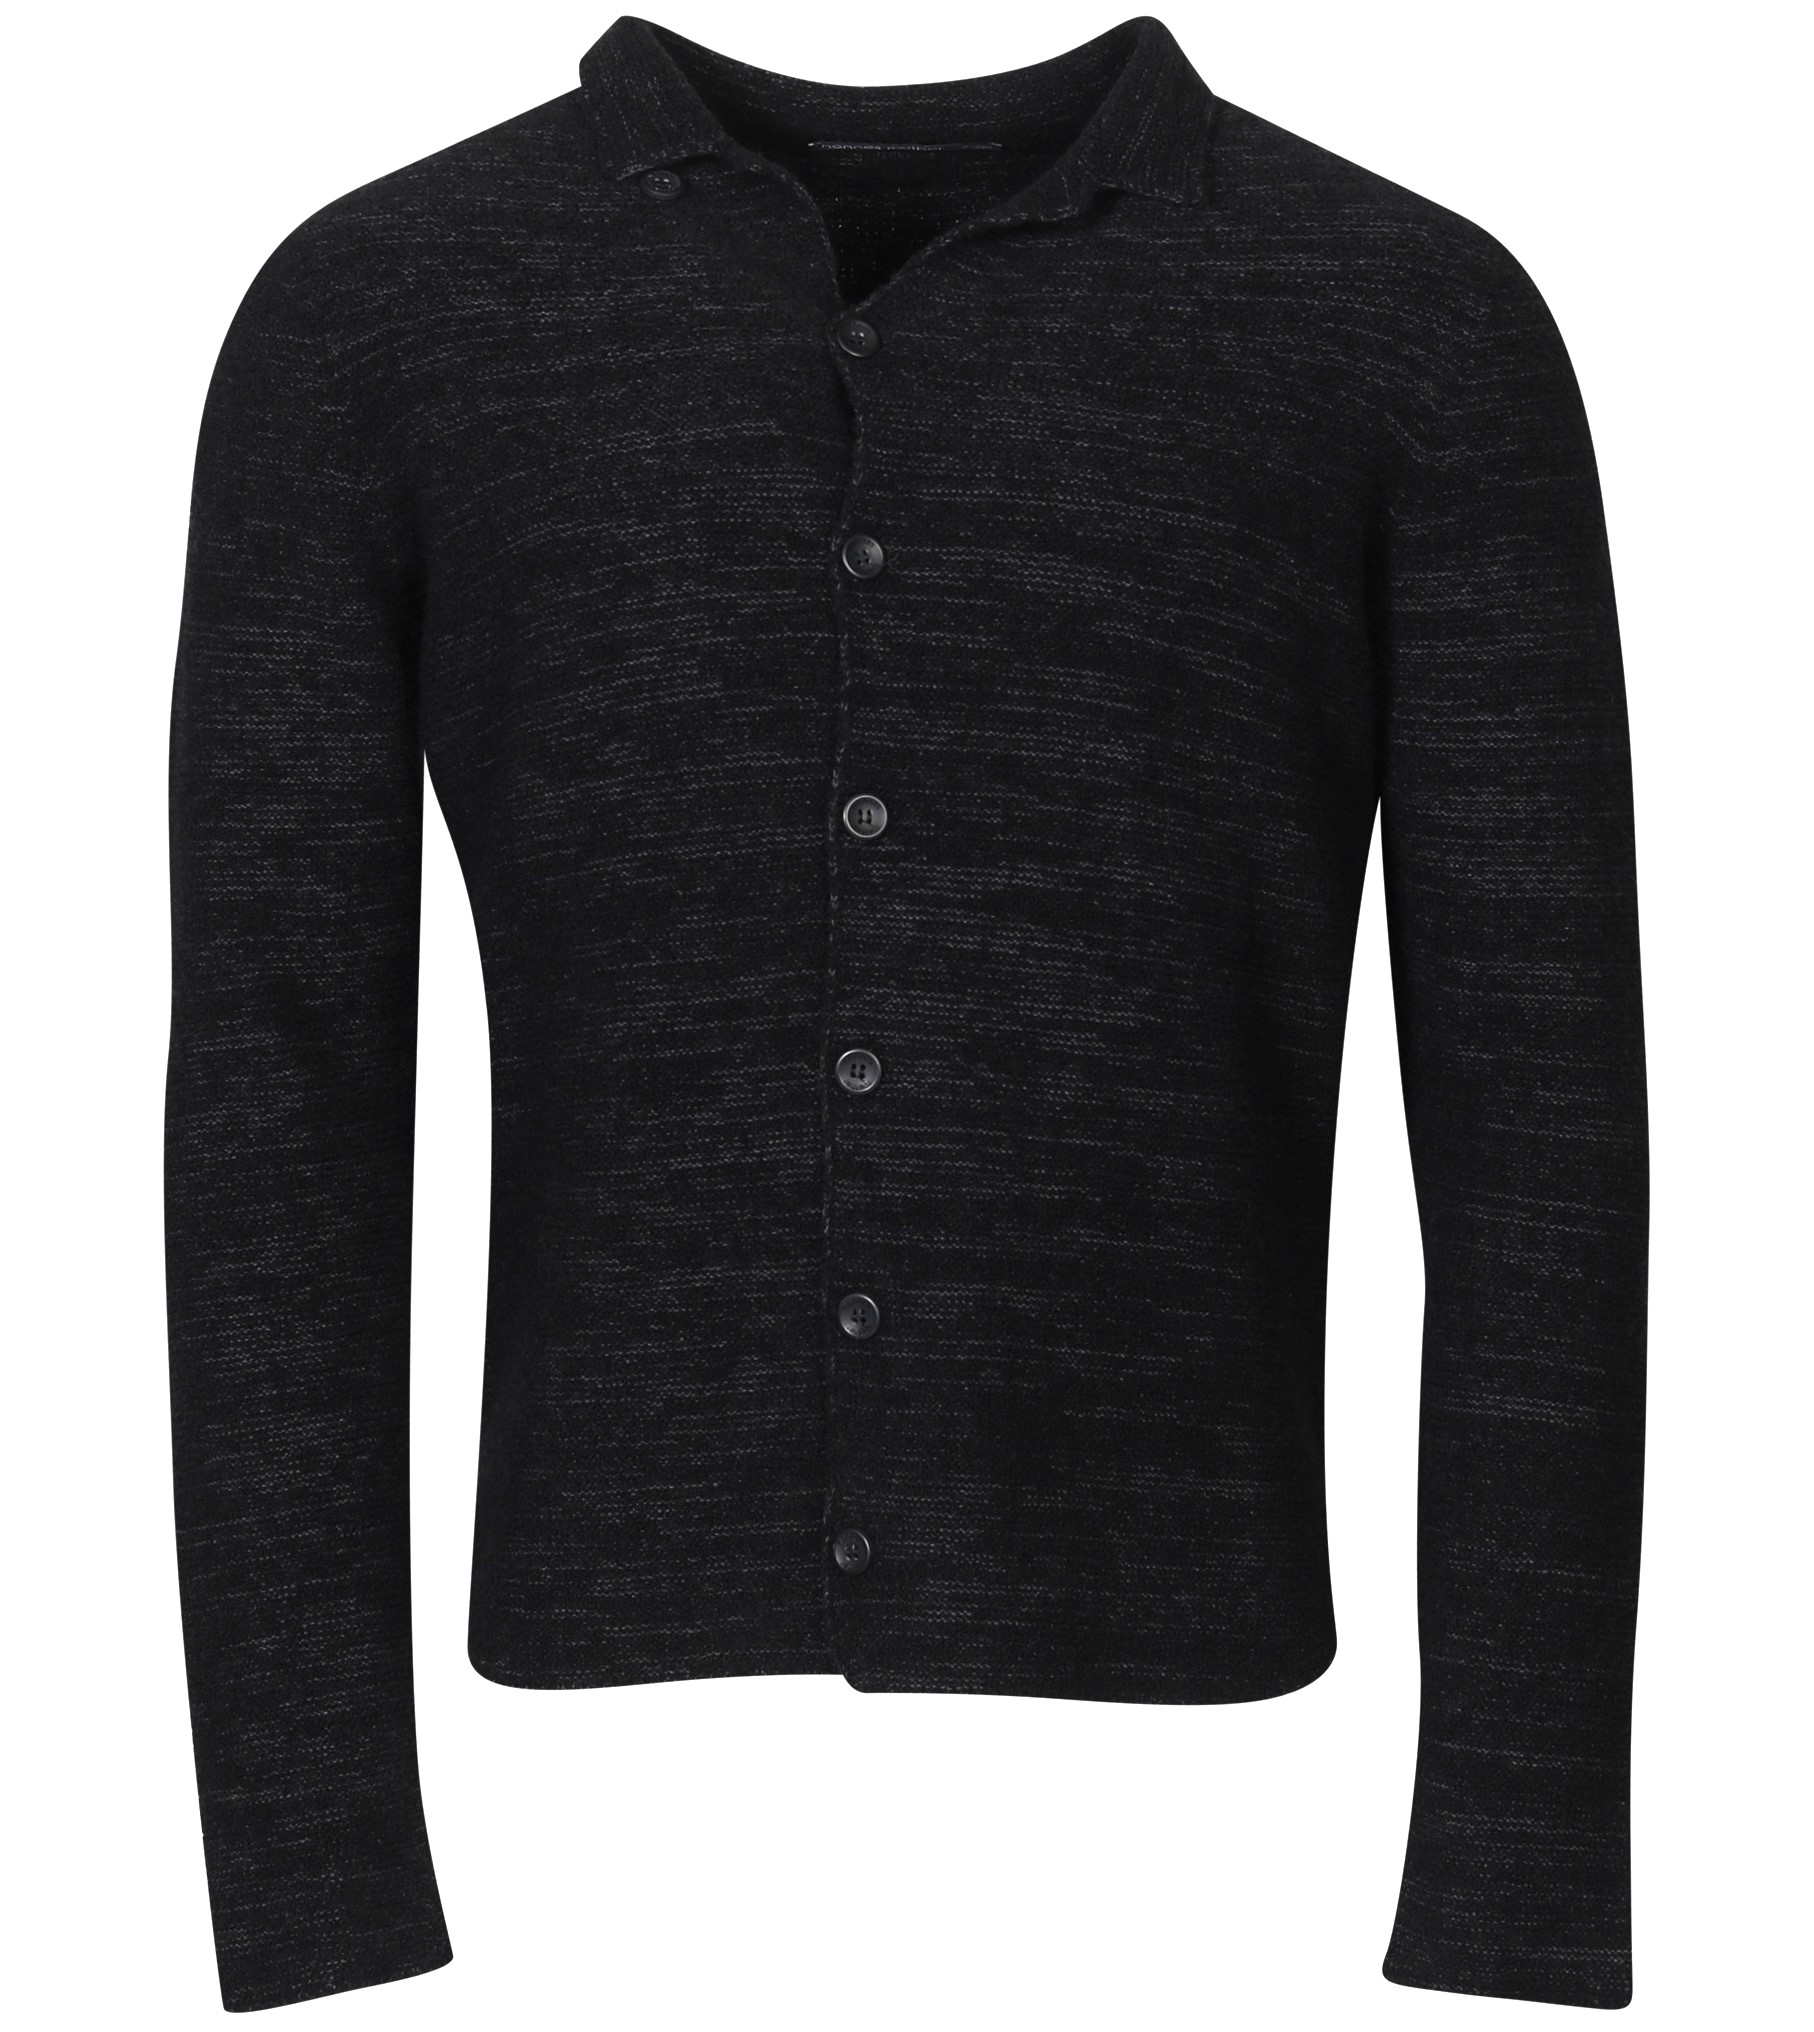 HANNES ROETHER Merino Knit Pullover in Black